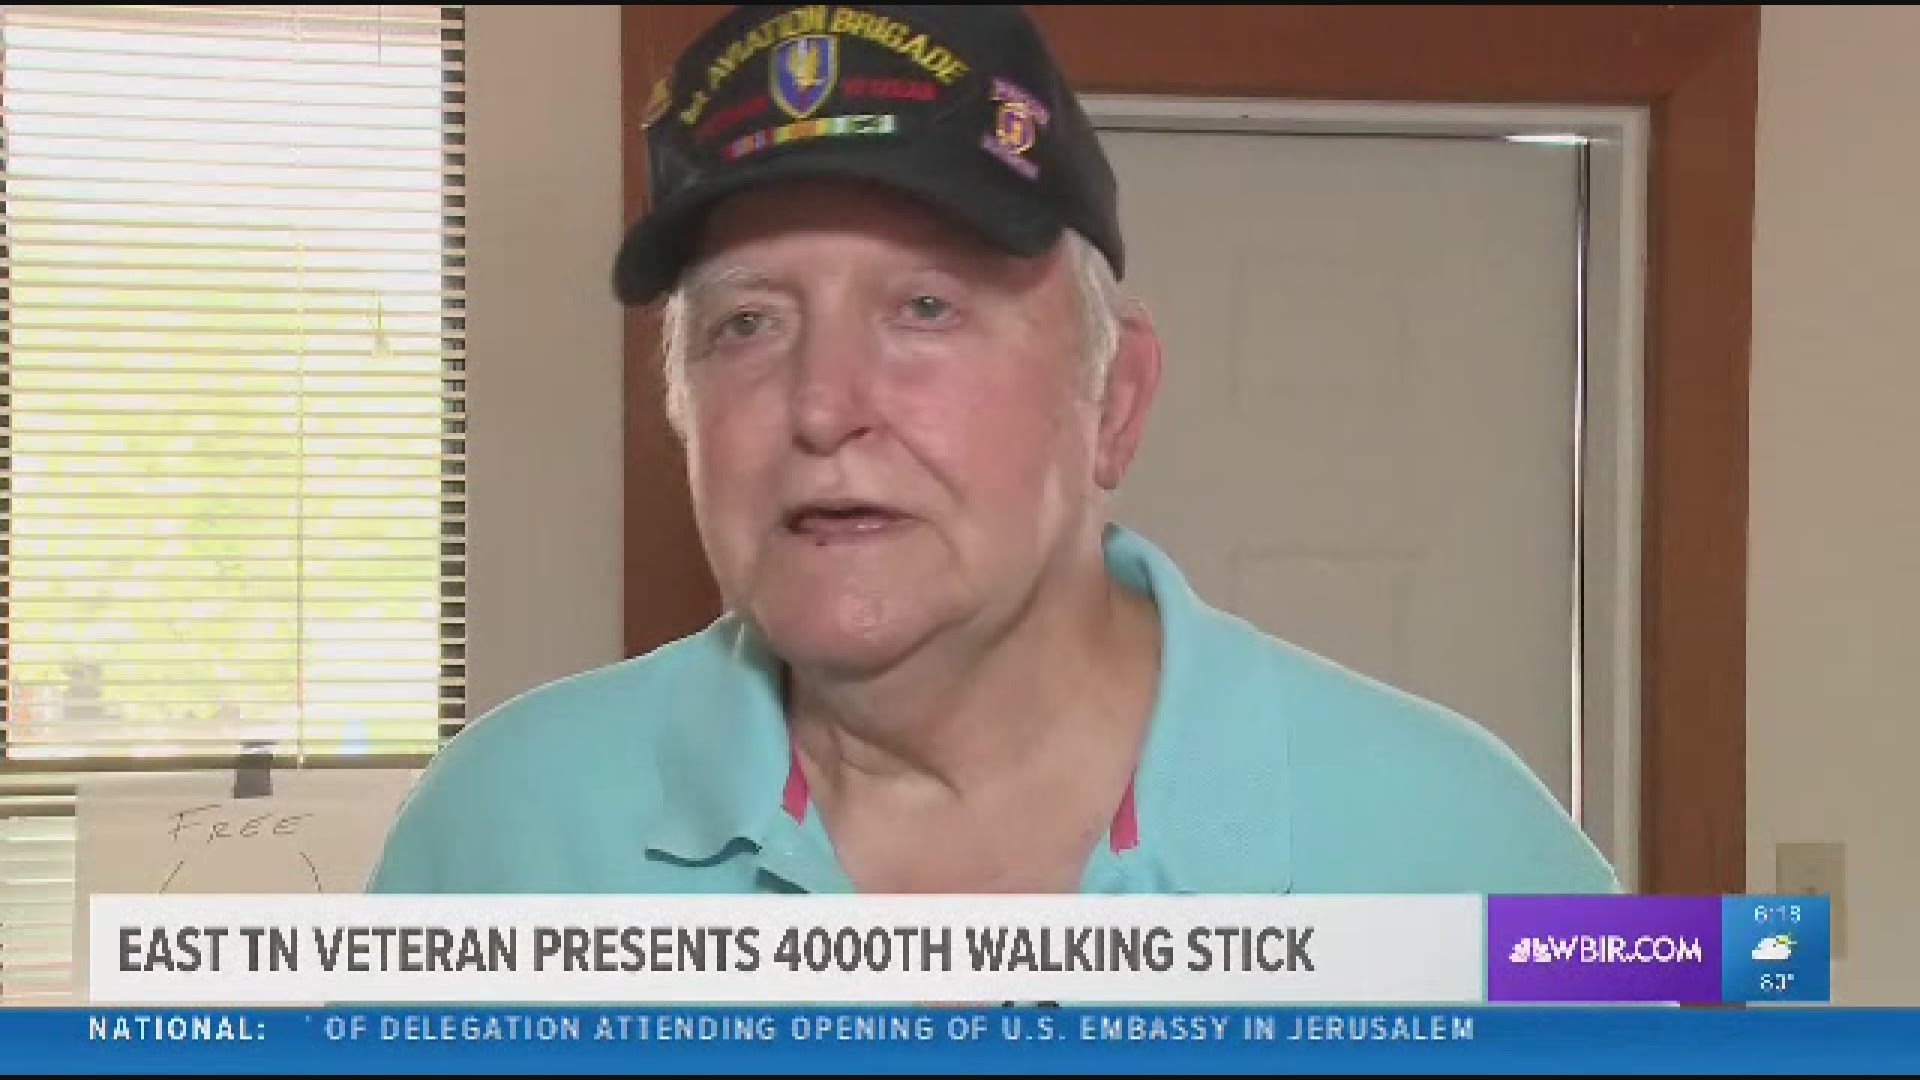 Johnny Whitehead's younger brother, Larry, died during the Vietnam War. He got two walking sticks from Steve Newman, another veteran, who turned his carving hobby into a regular tribute to East Tennessee veterans.